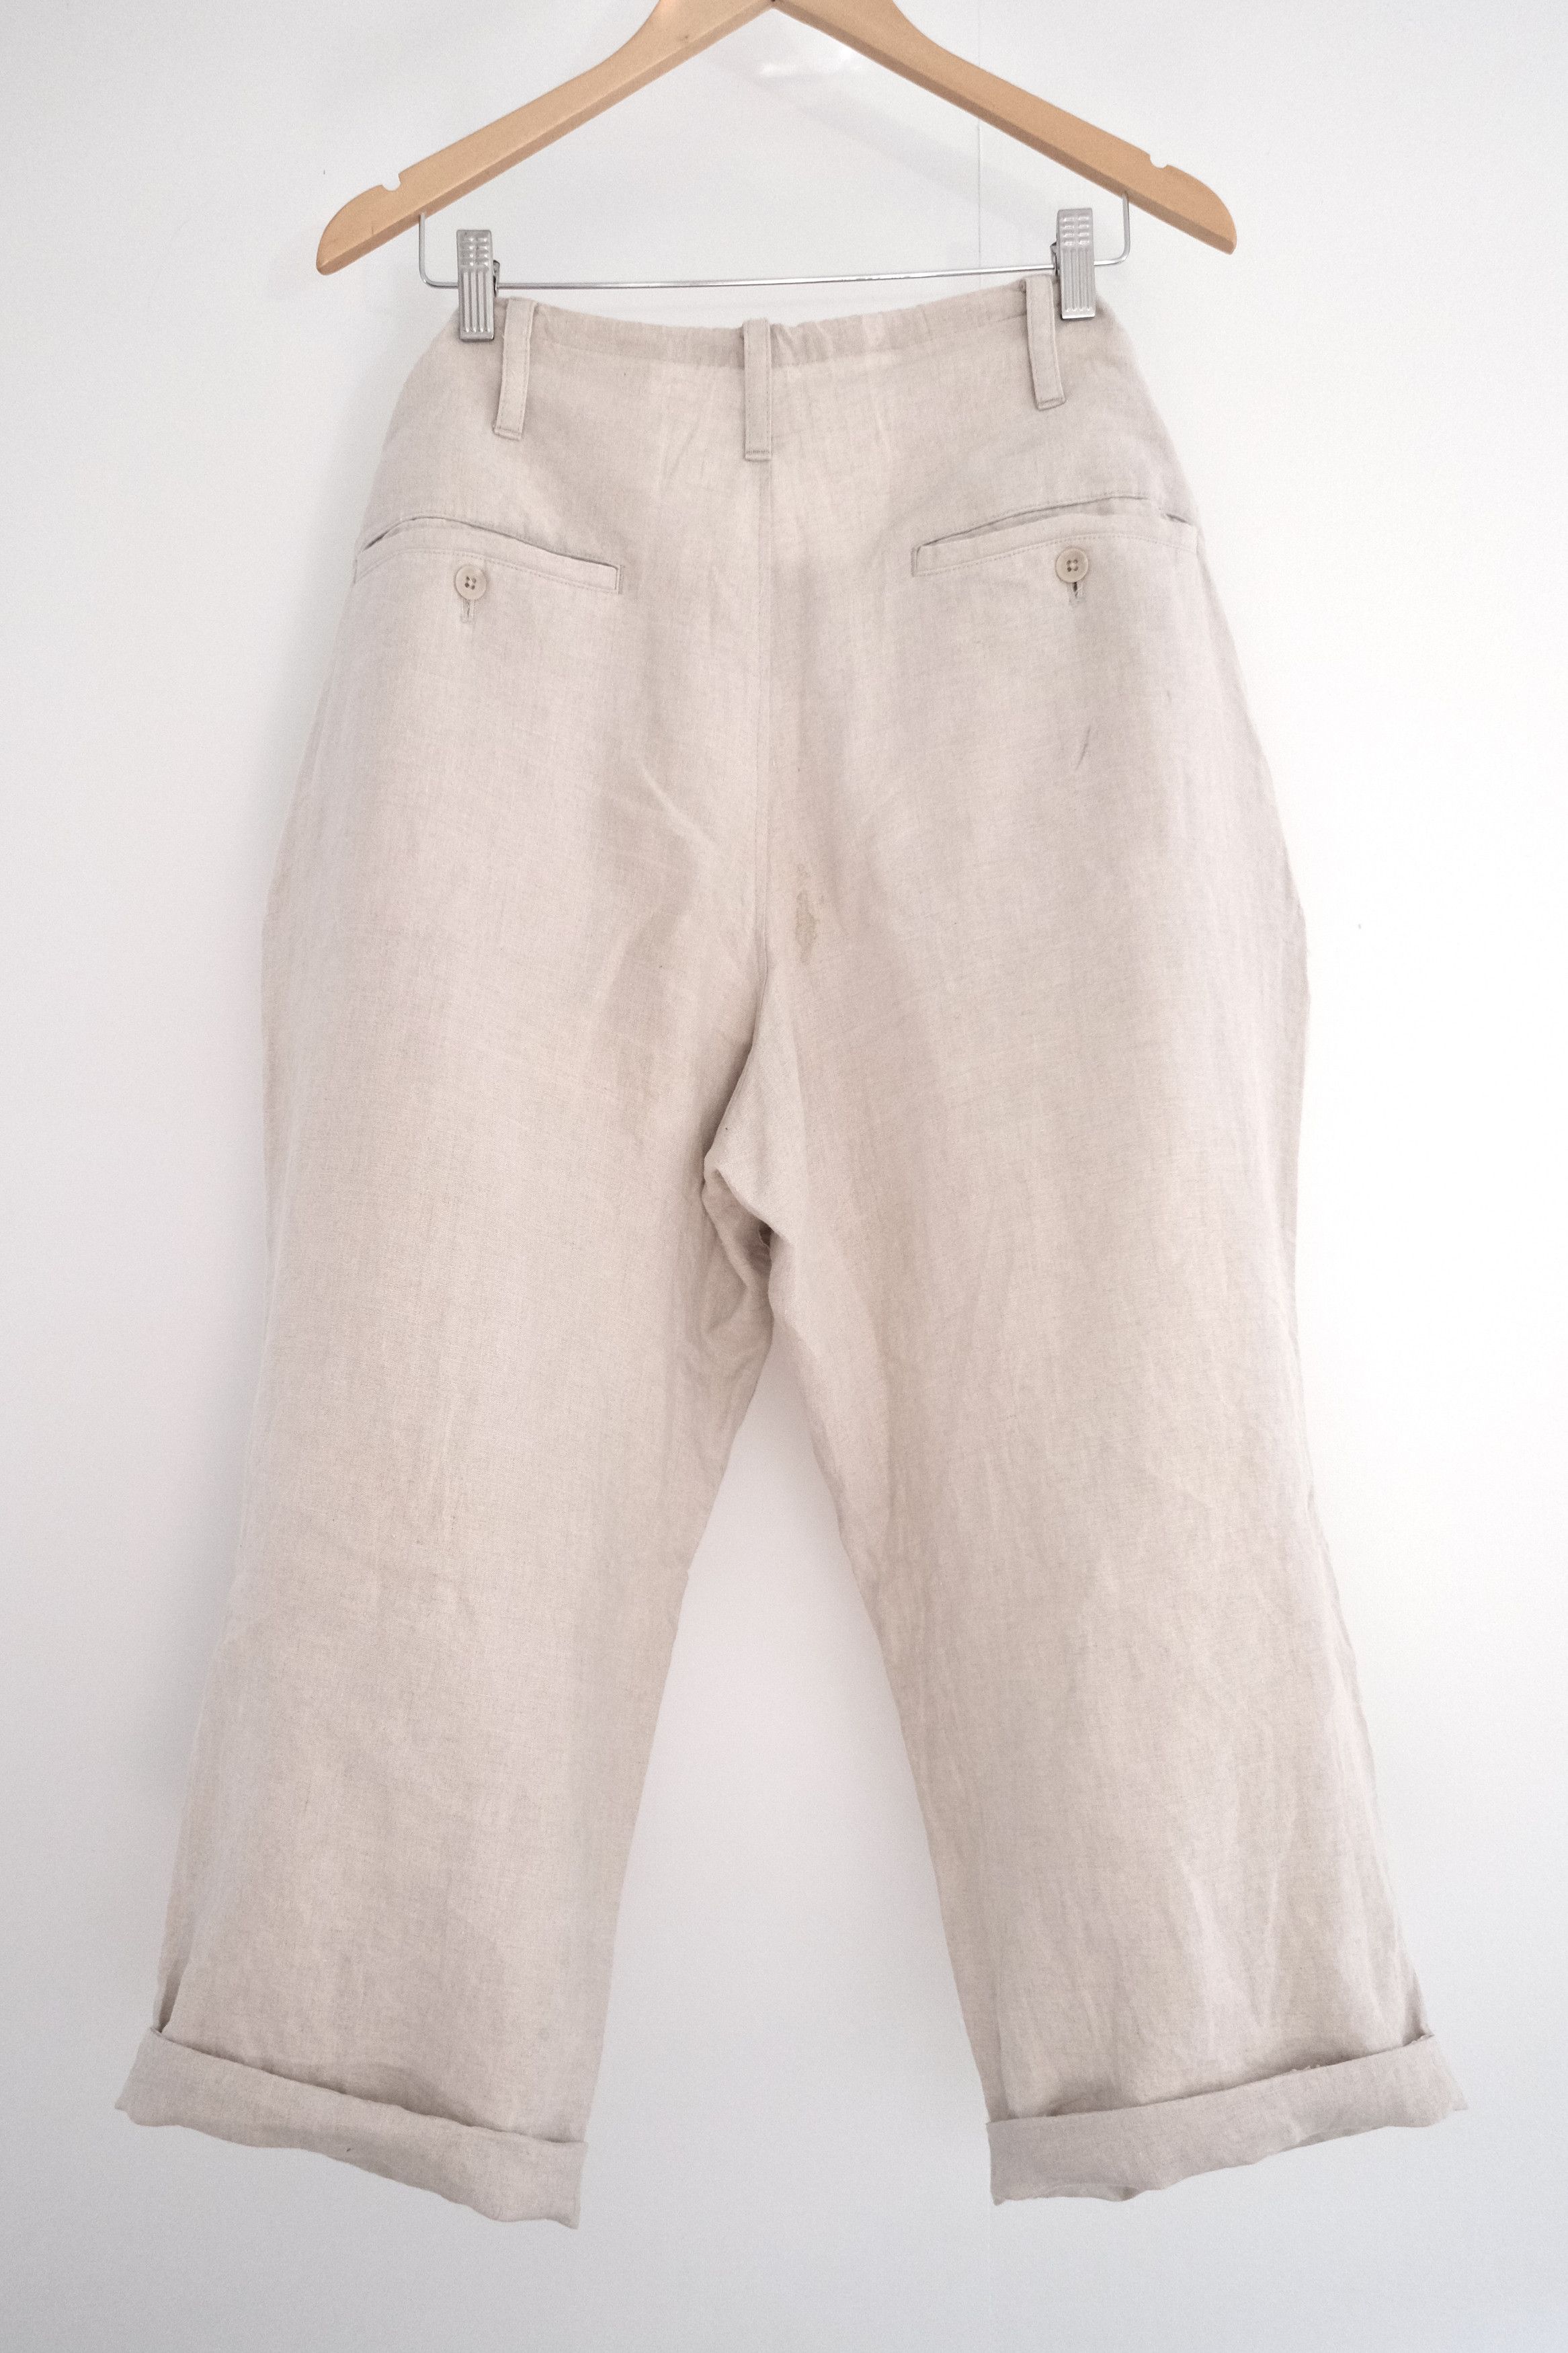 🎐 YYPH SS18 Wide Drawstring Linen Easy Pants - 23